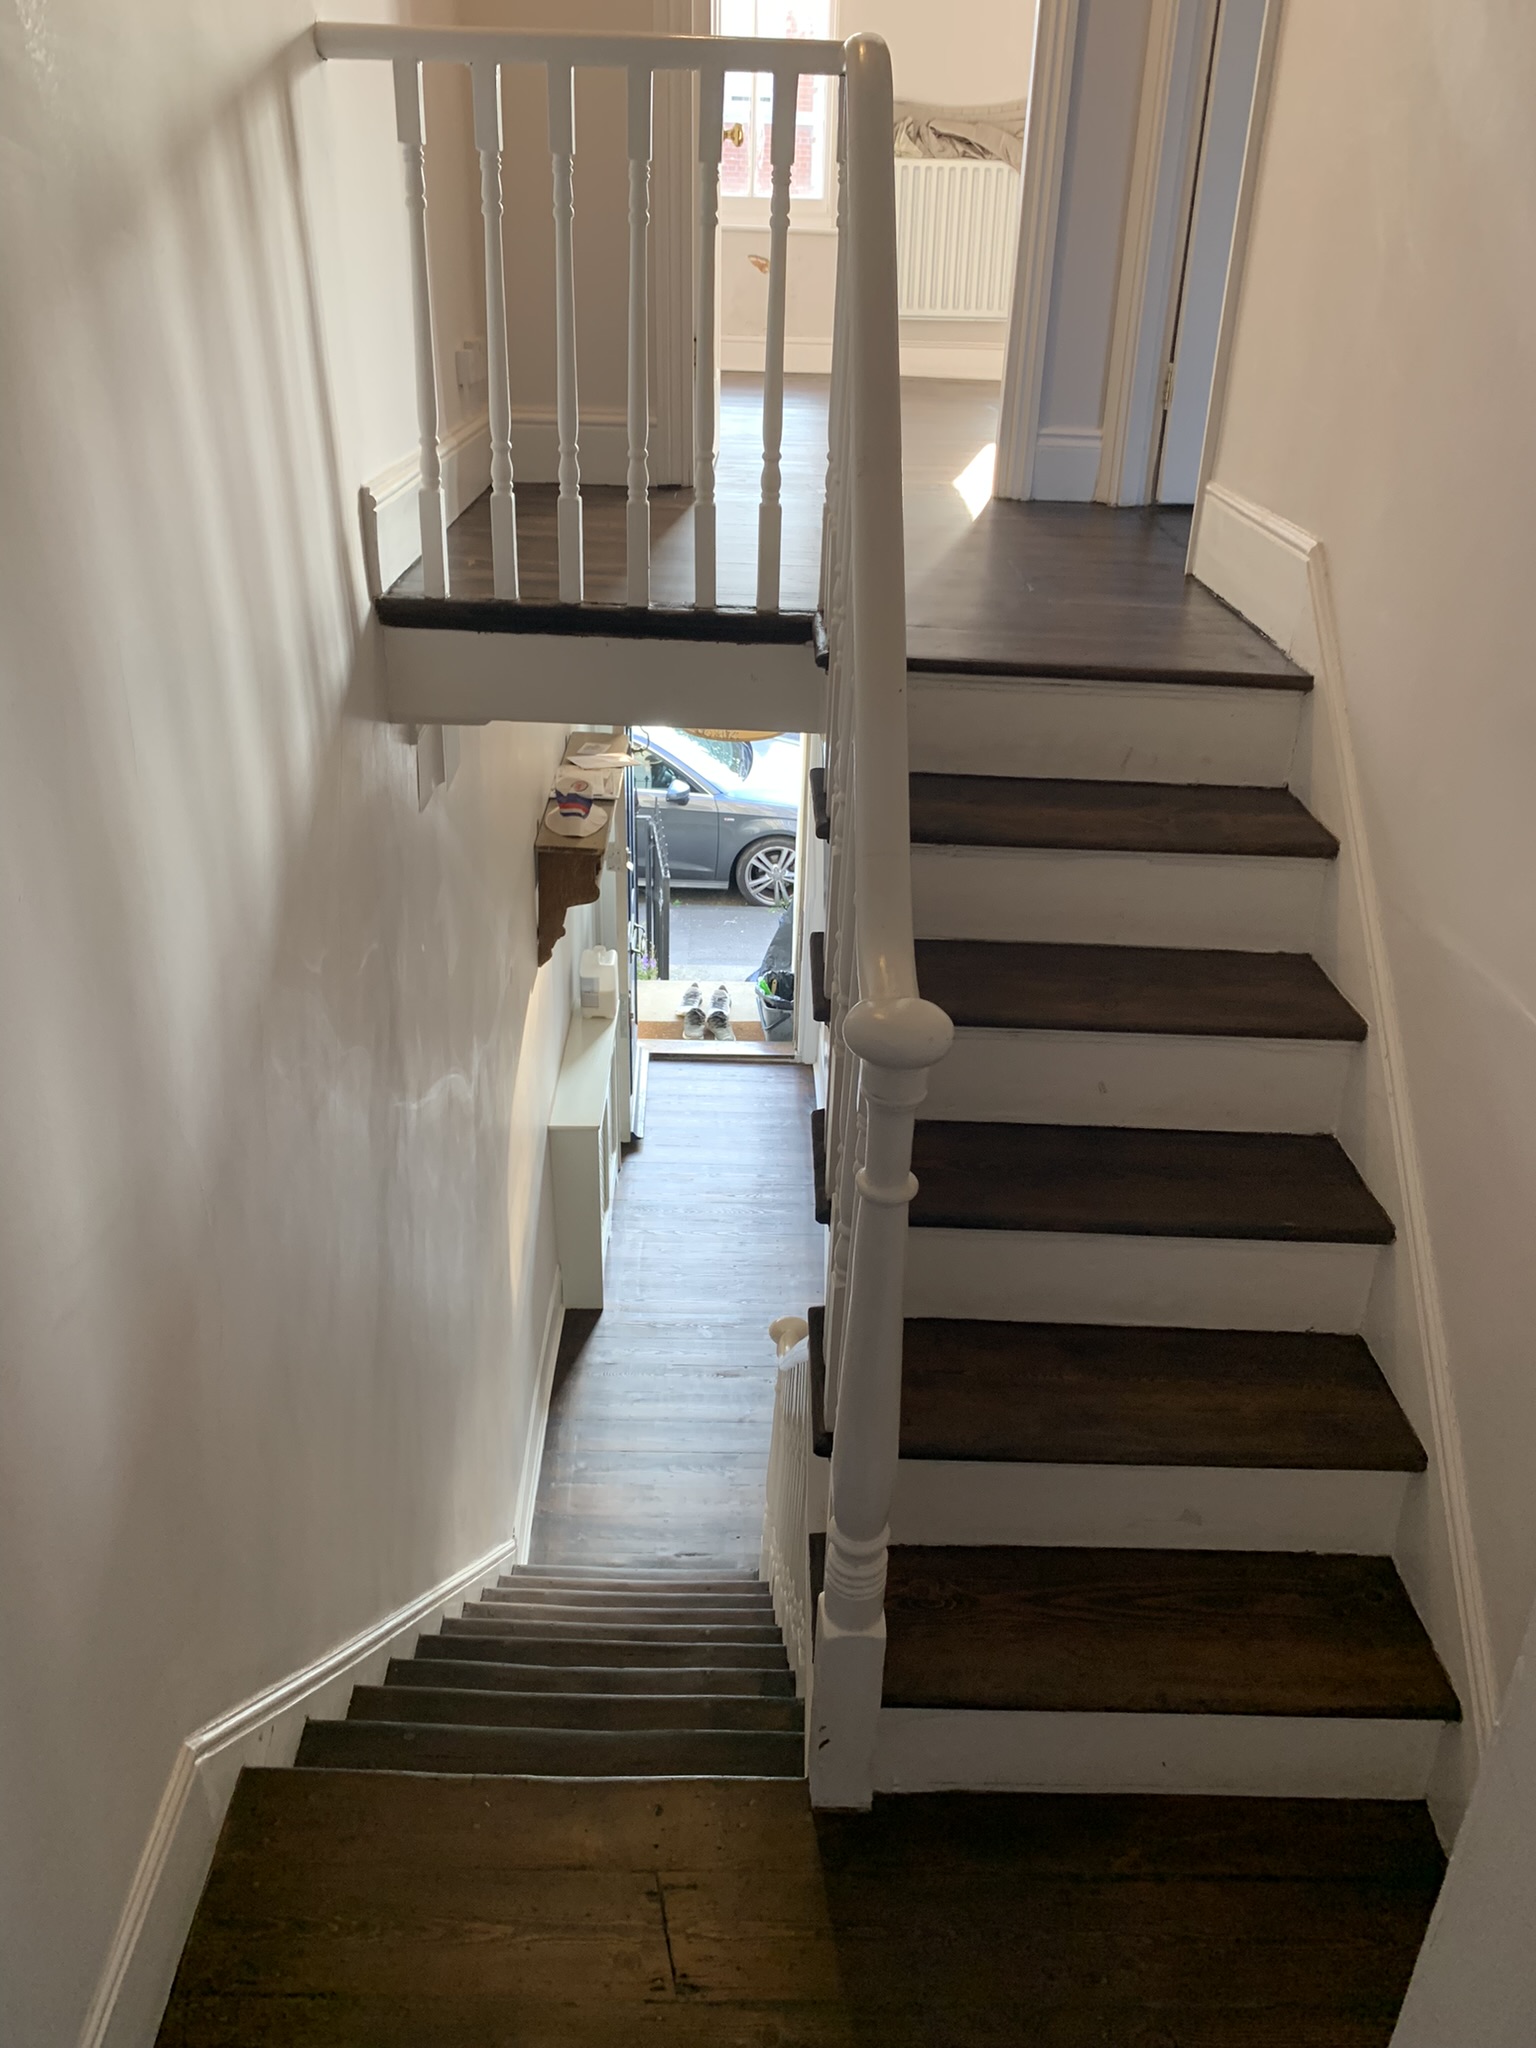 Stairs and Bannisters Sanding London